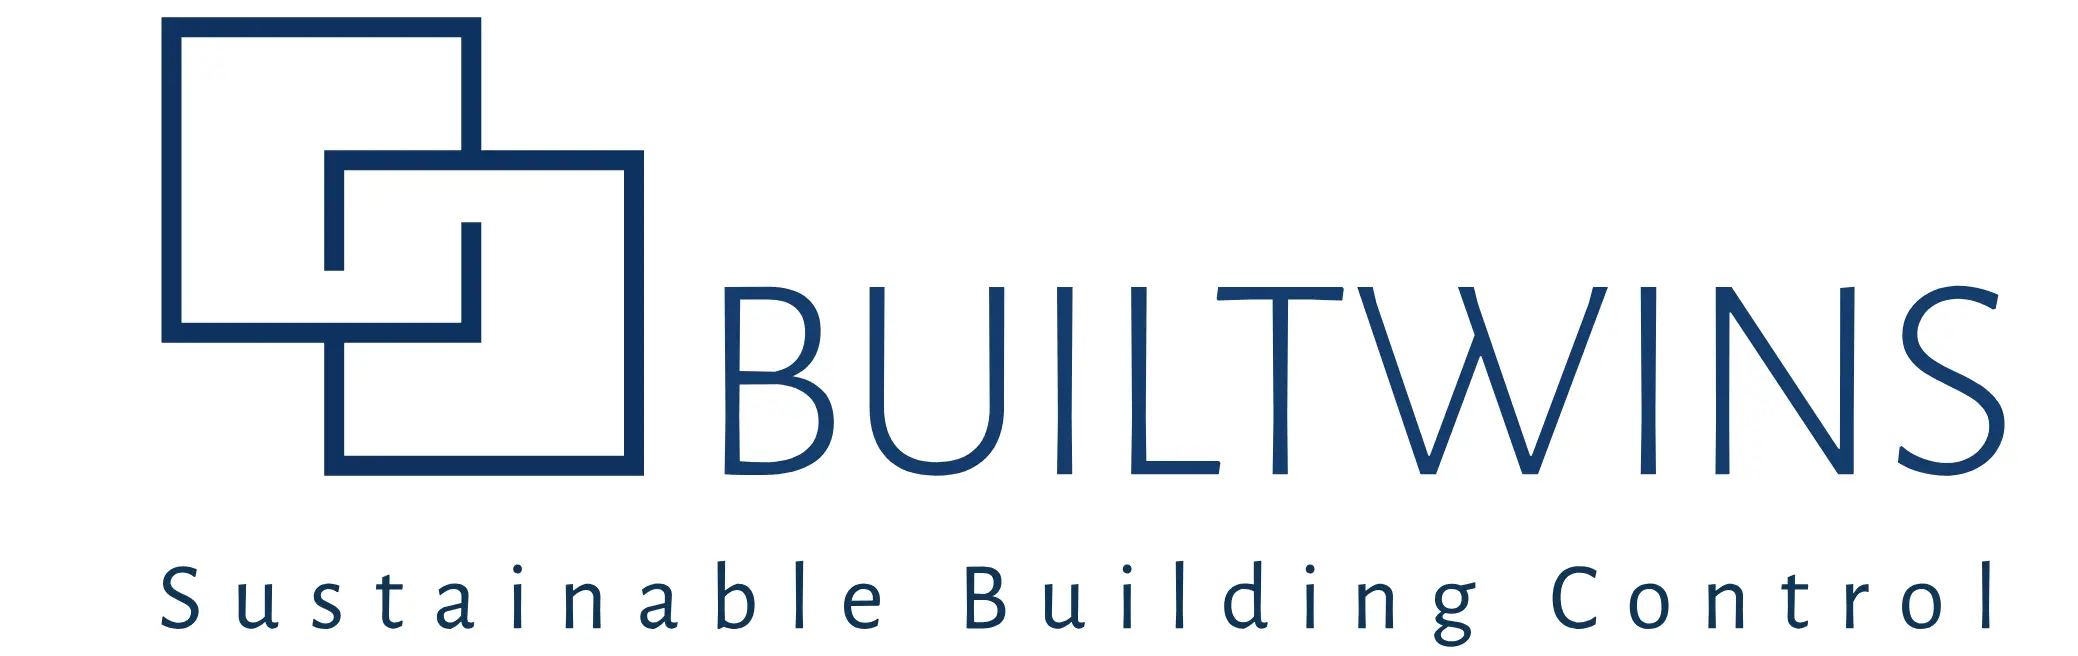 Builtwins